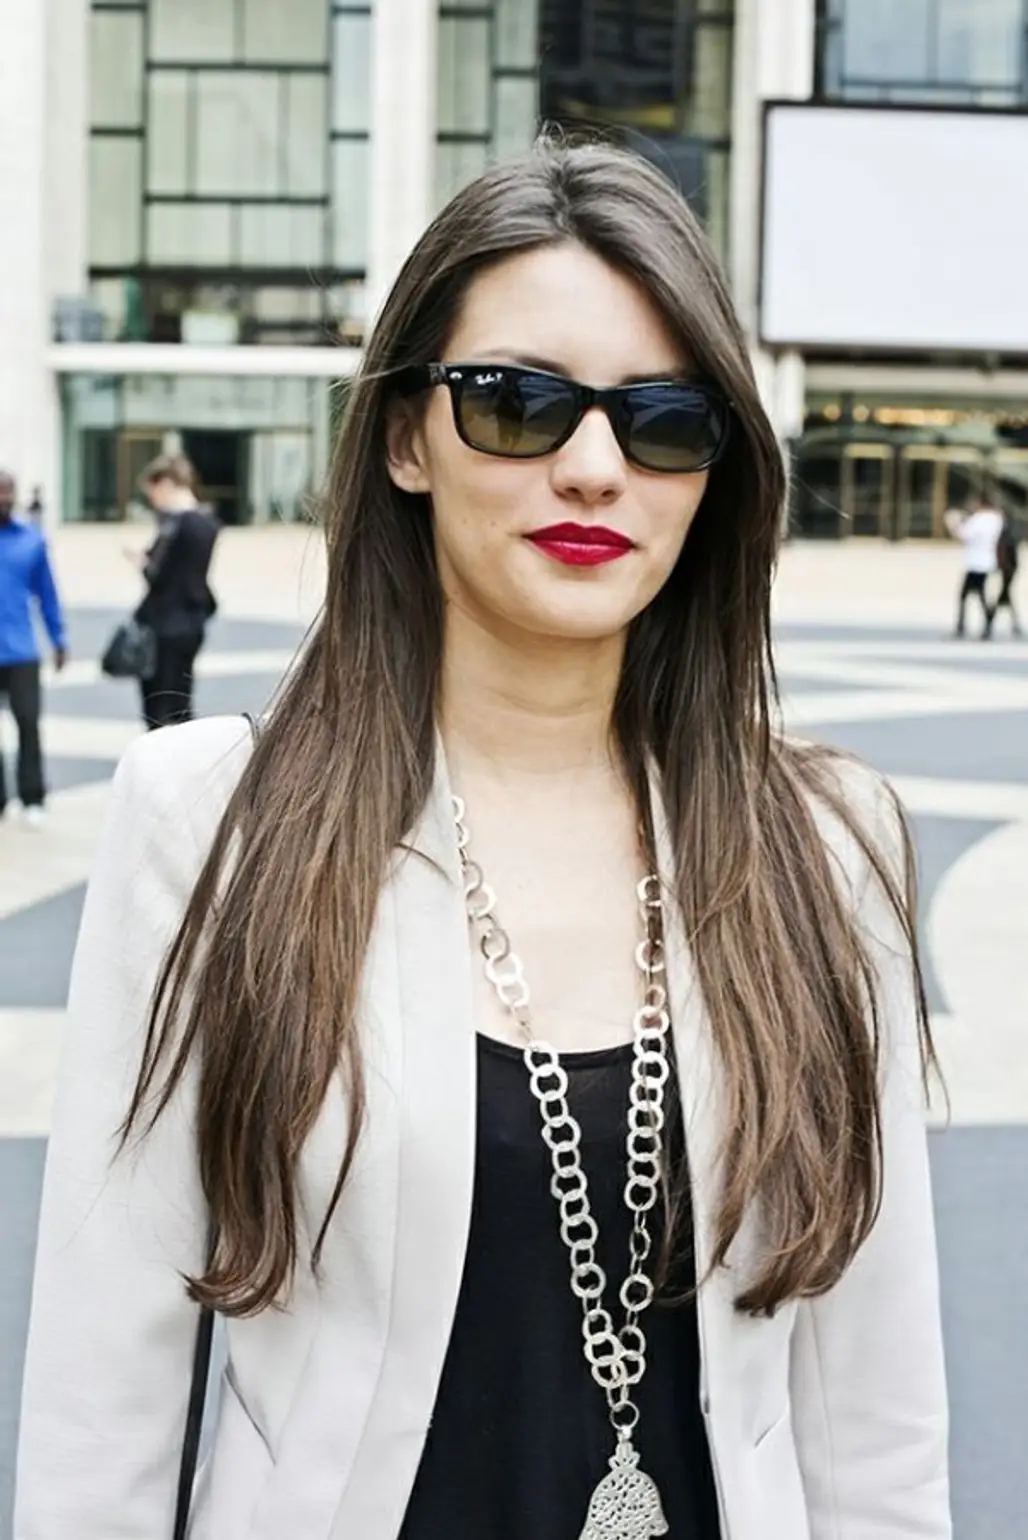 Dark Sunglasses and a Chunky Necklace